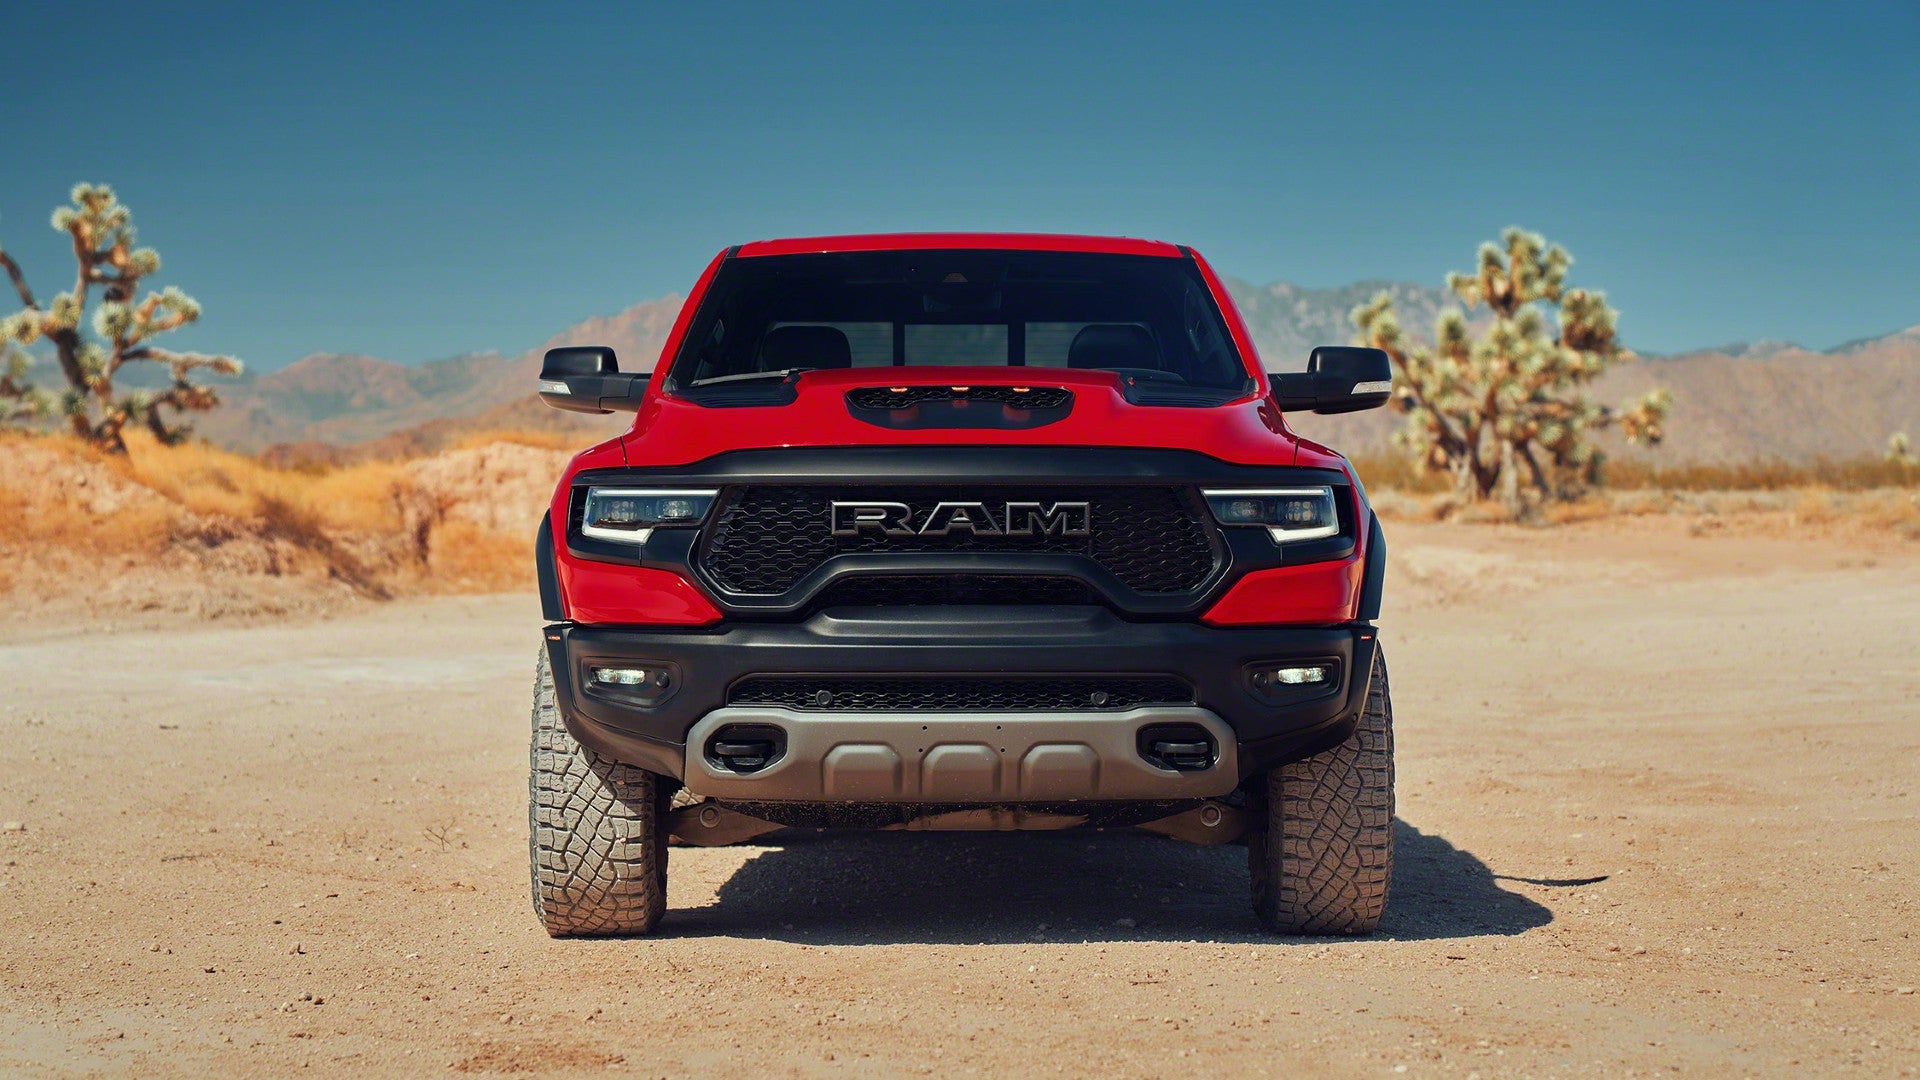 2021 Ram TRX Is the First Factory Supercharged Truck Since the Ford SVT